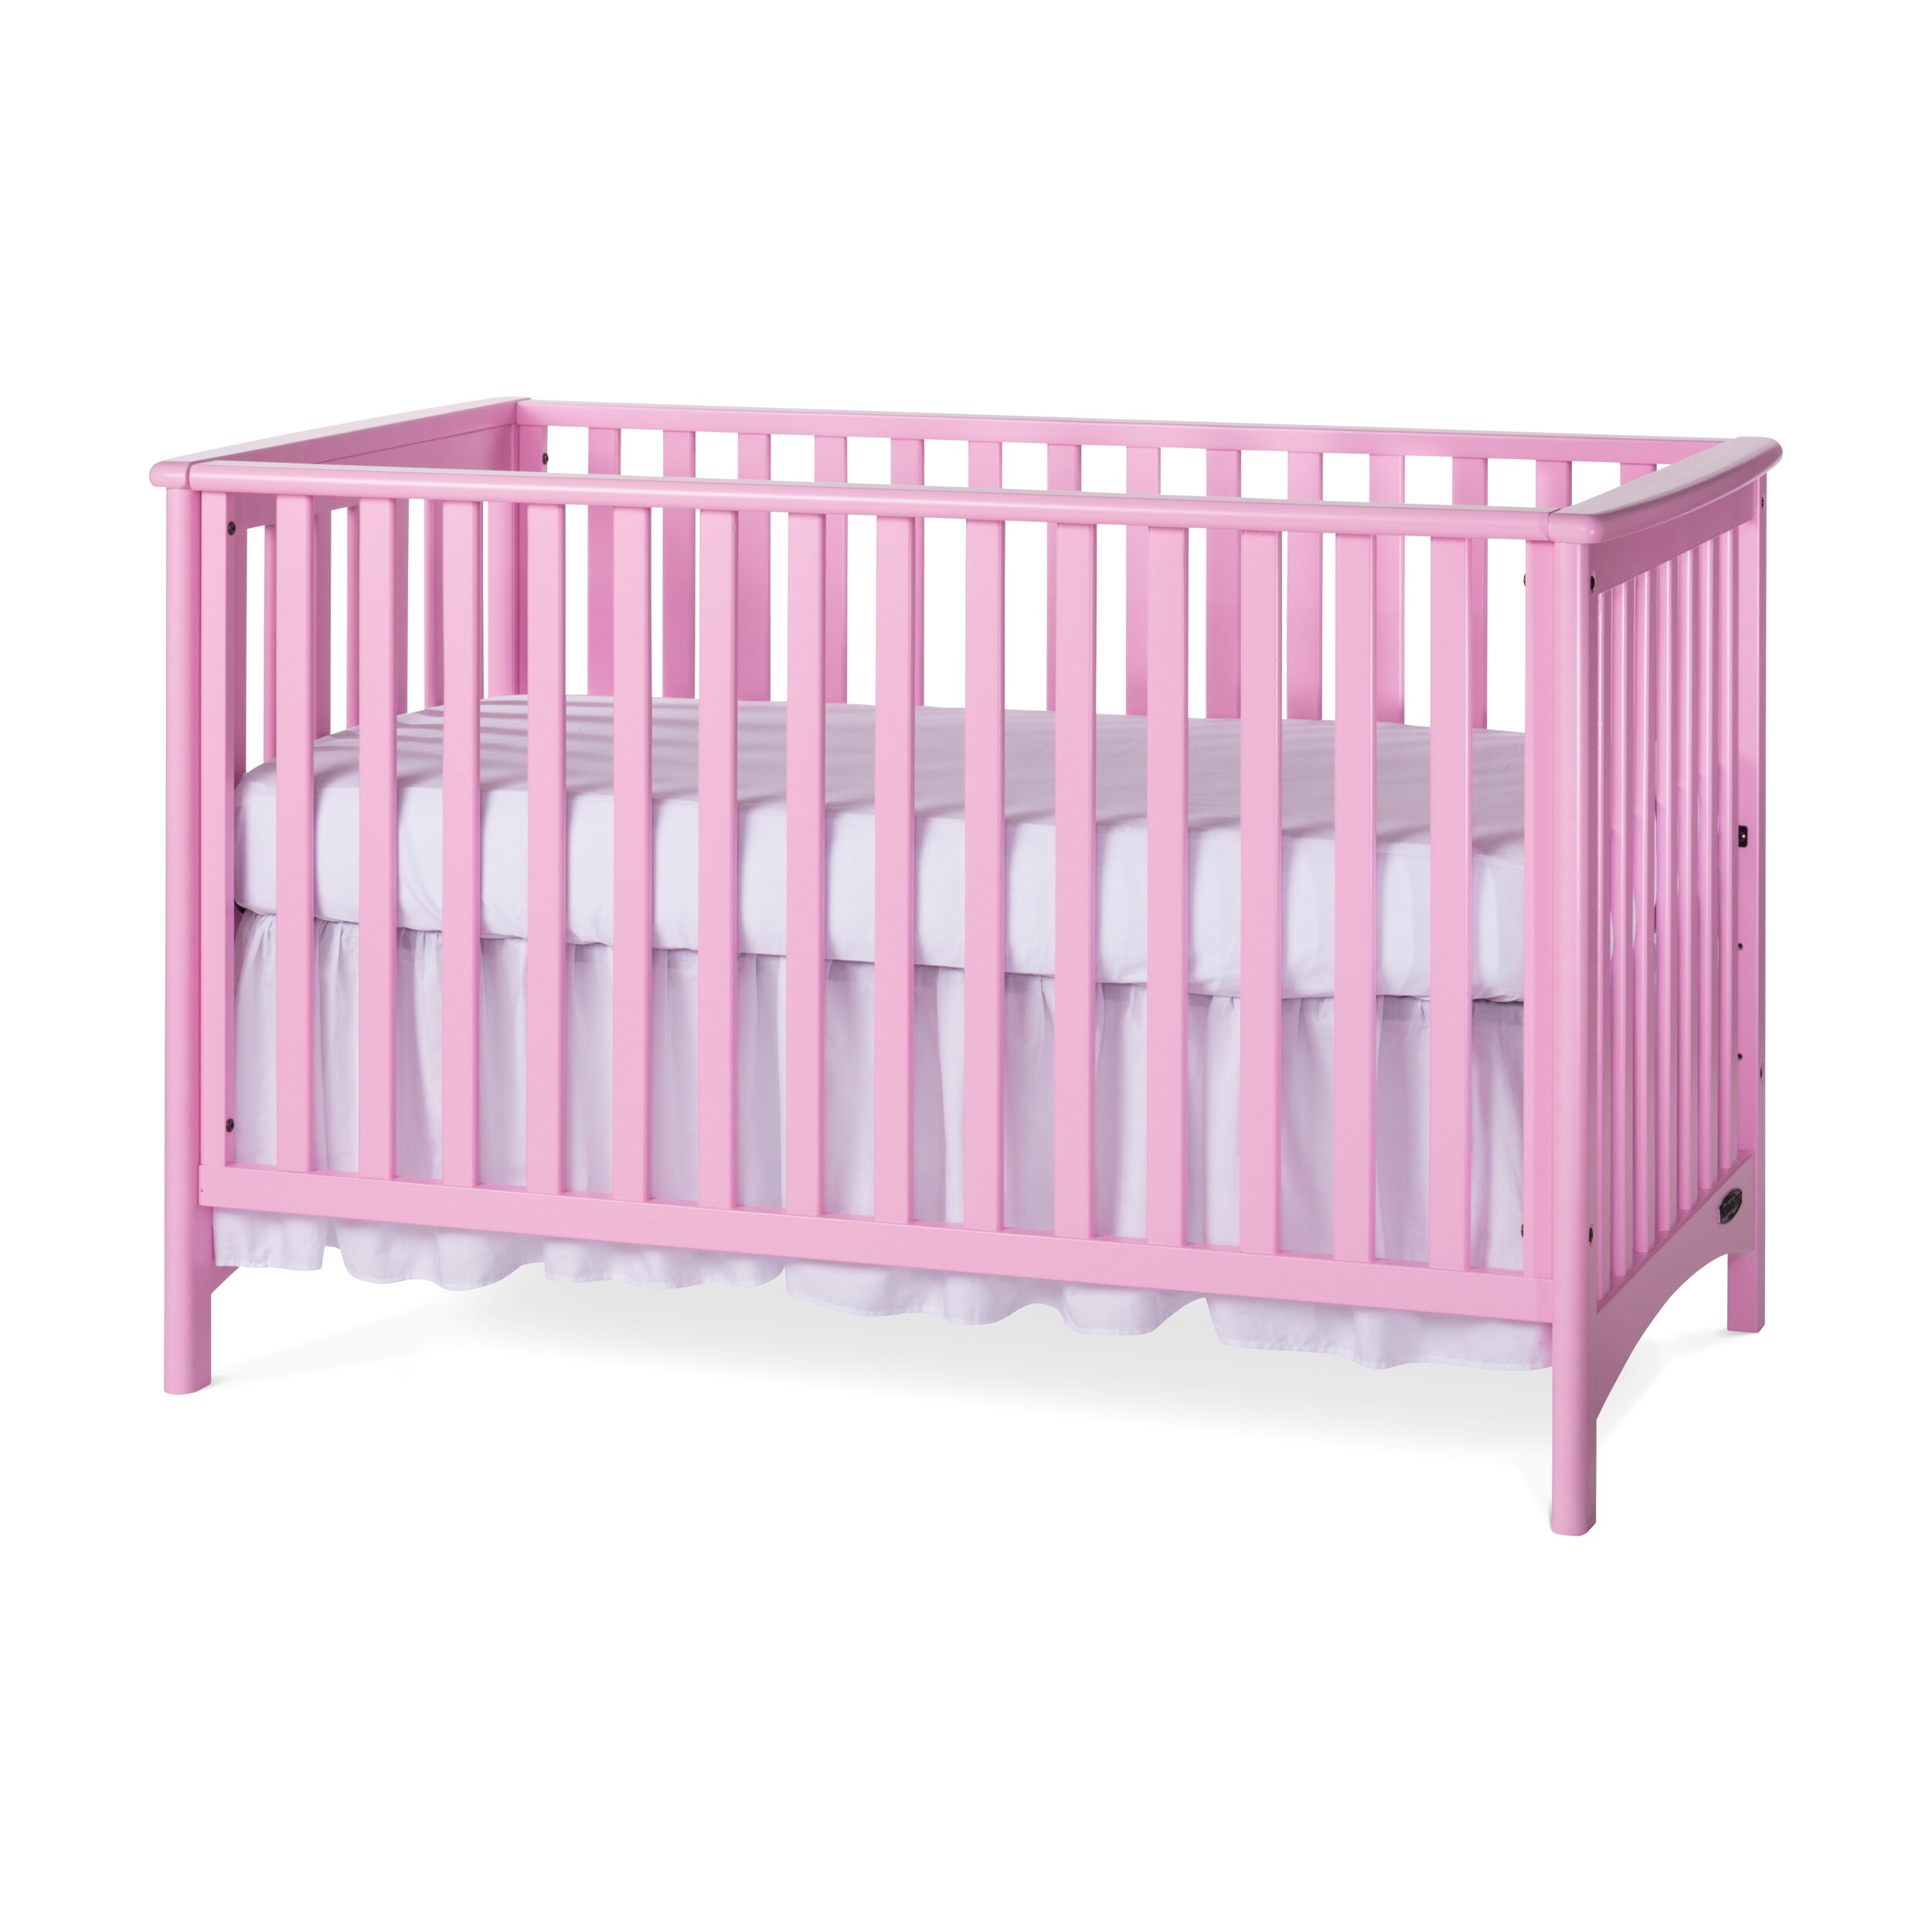 Shop Child Craft Pink London 3-in-1 